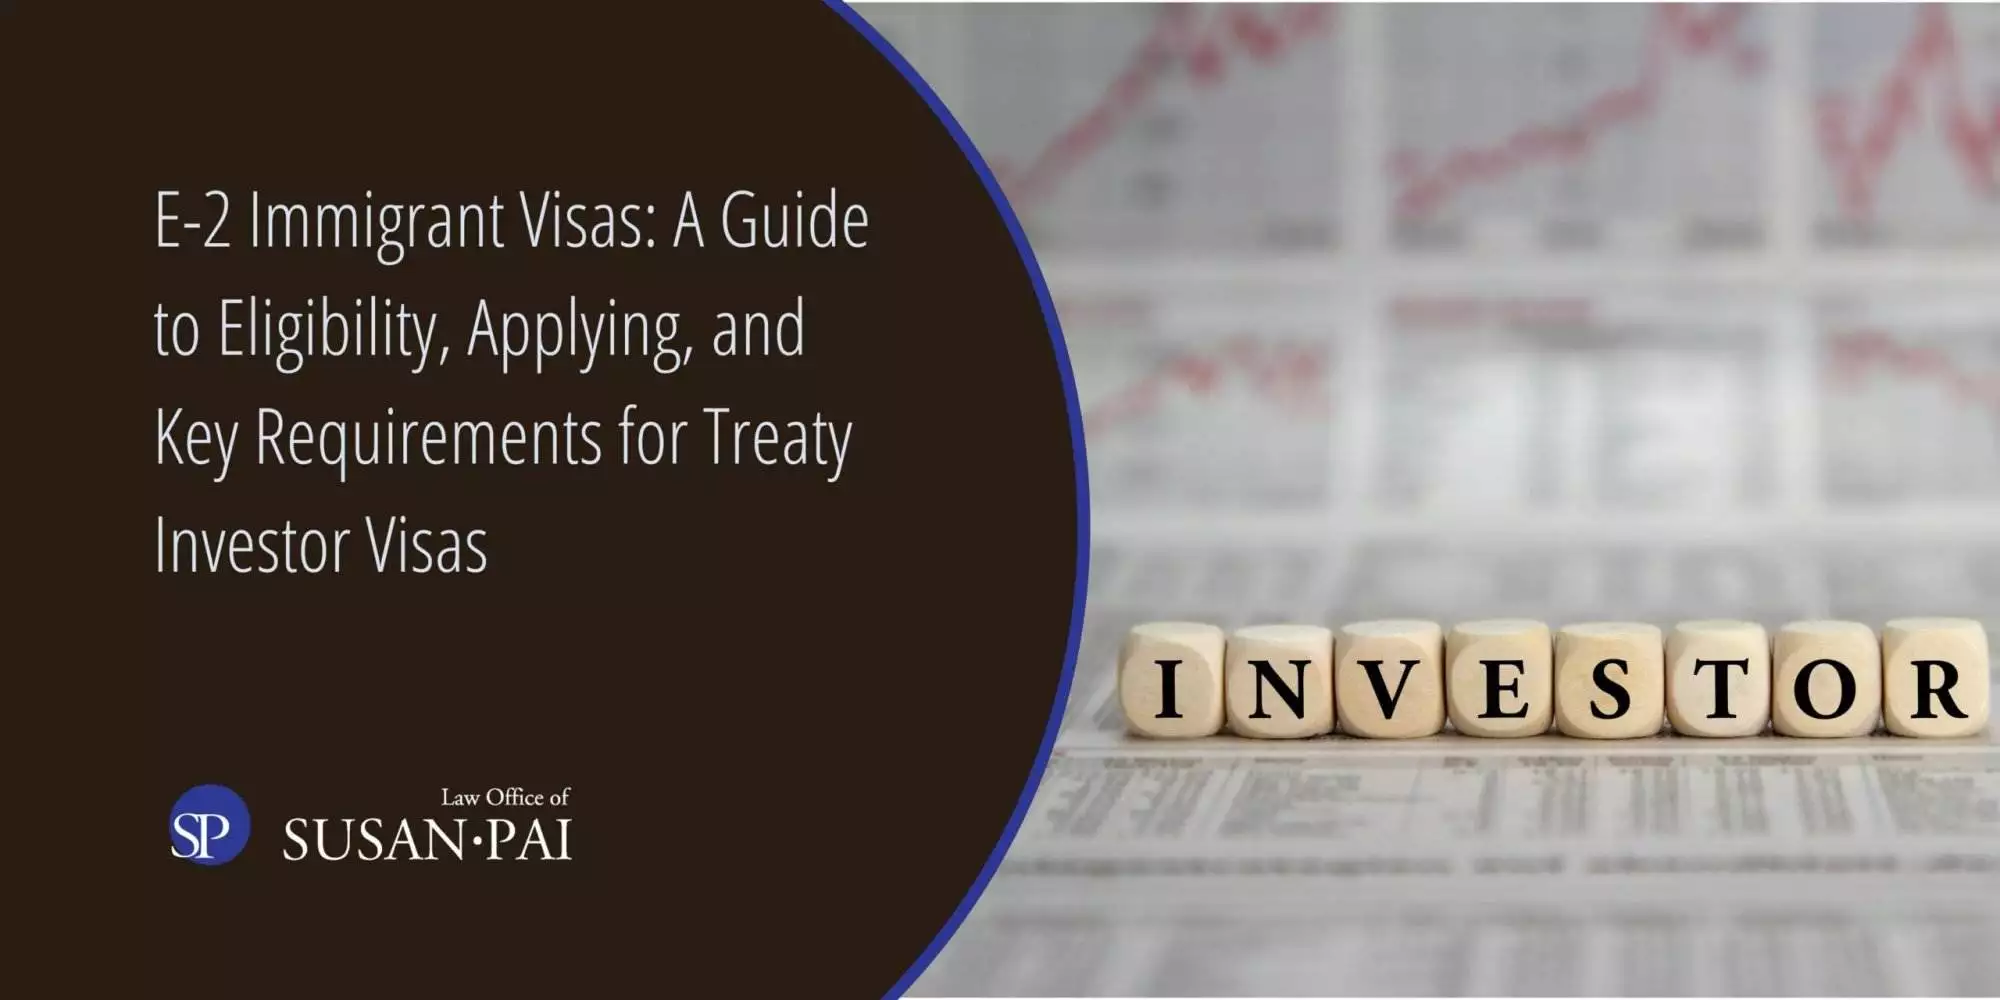 E-2 Immigrant Visas: A guide to Eligibility, Applying, and Key Requirements for Treaty Investor Visas